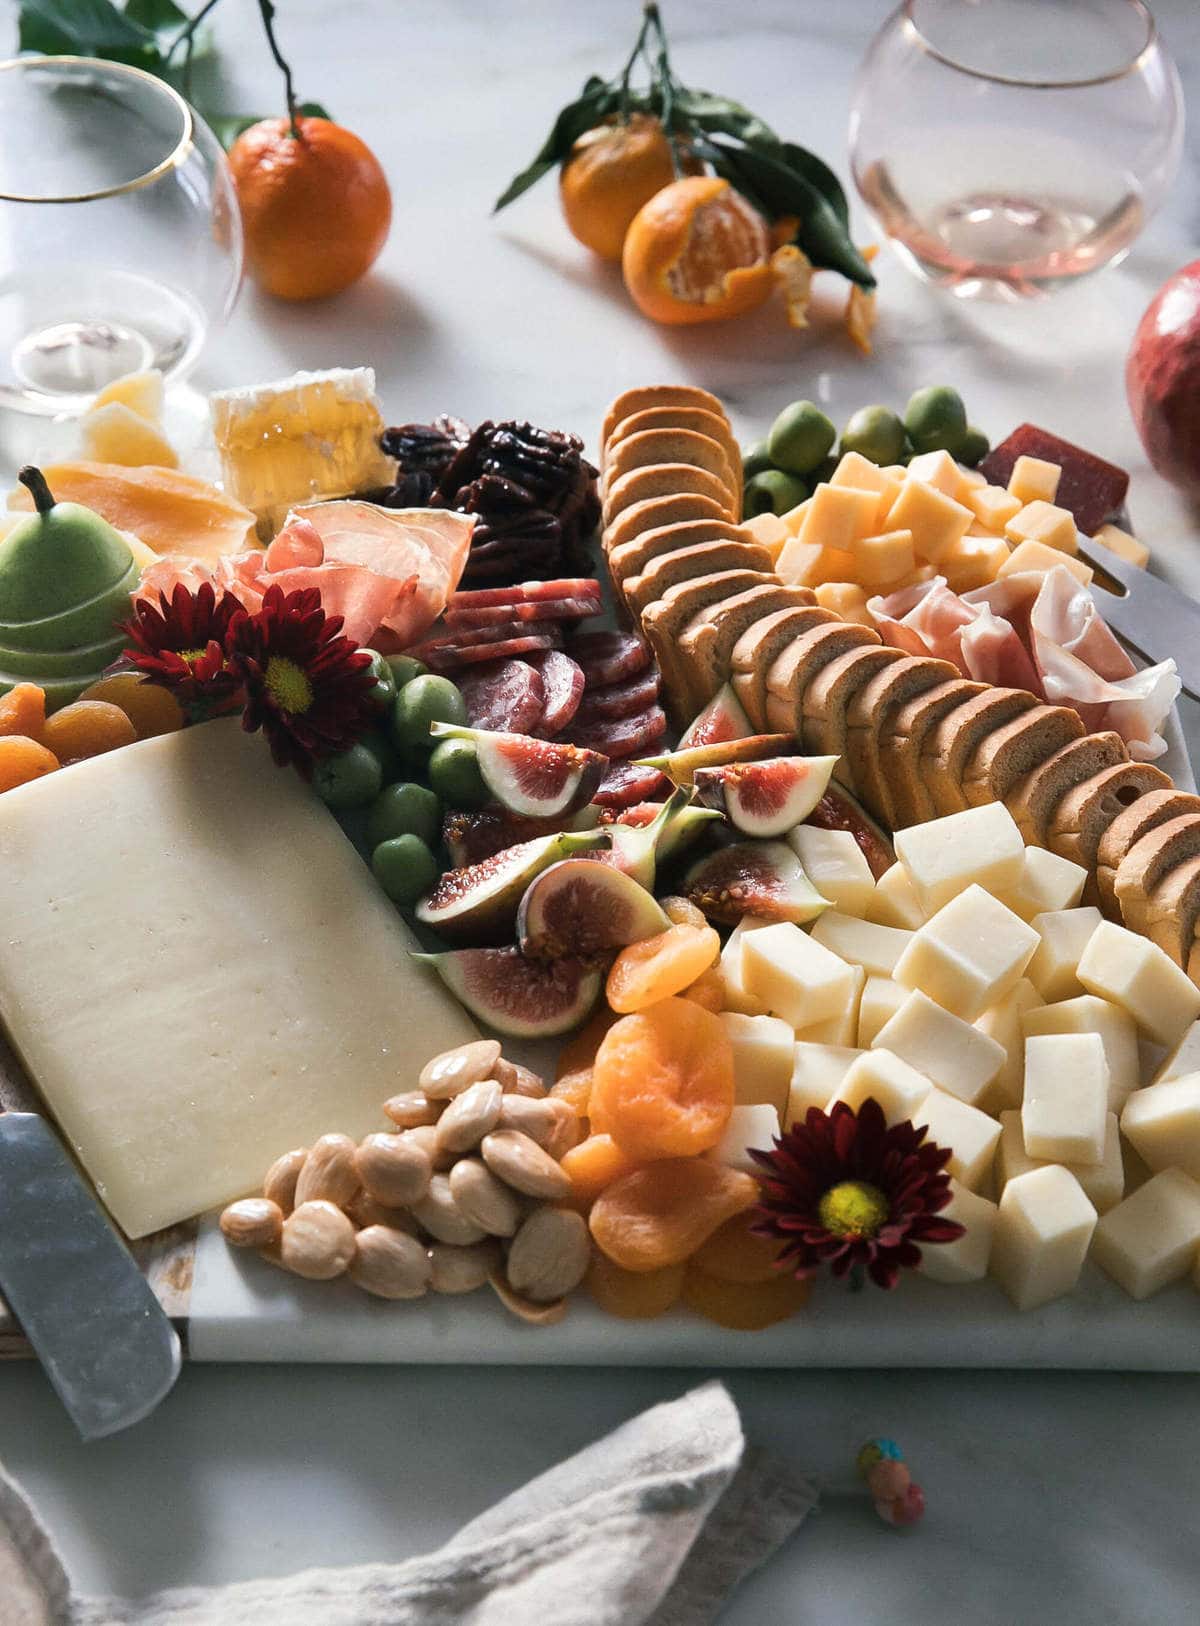 How to Build a Fall/Winter Cheese Board